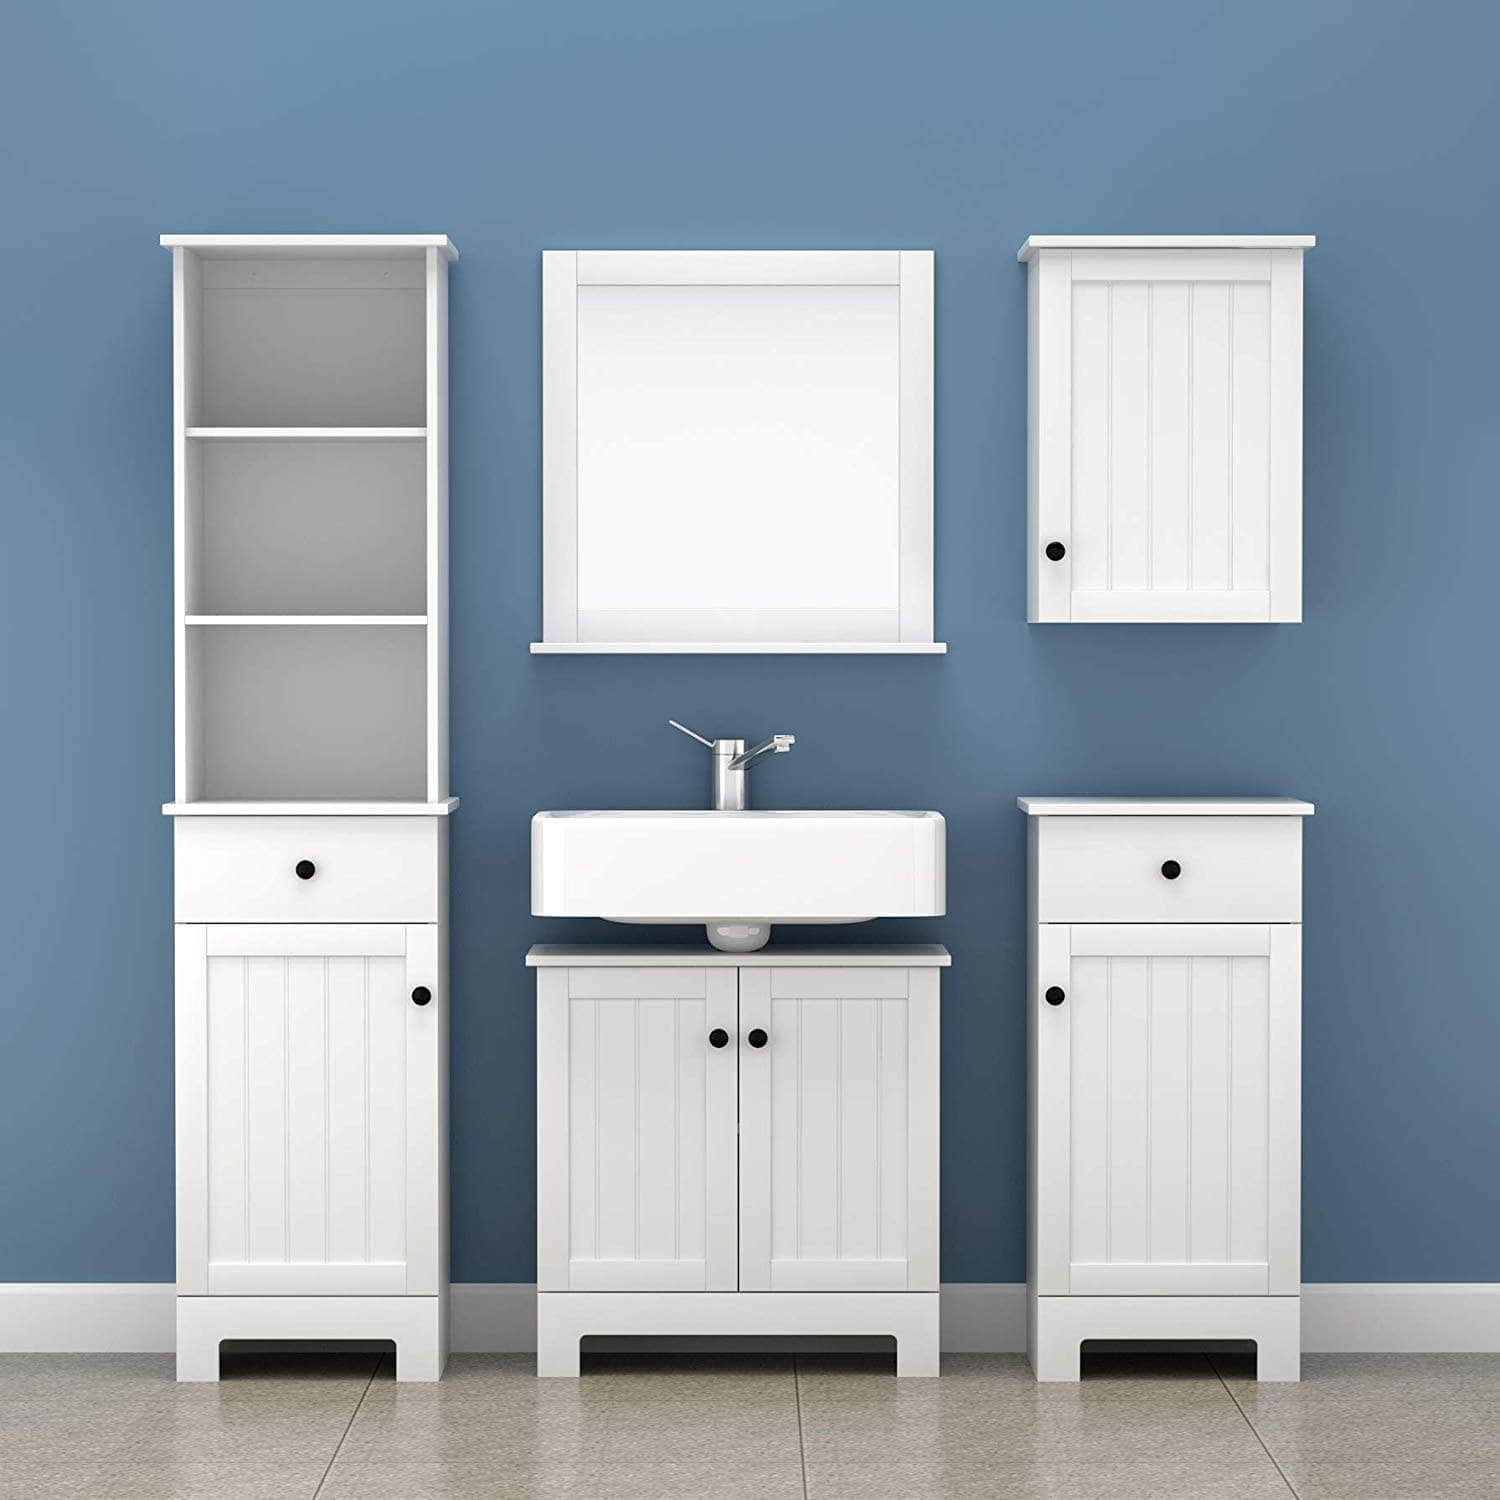 White Wall Cabinet with Door 40x52cm